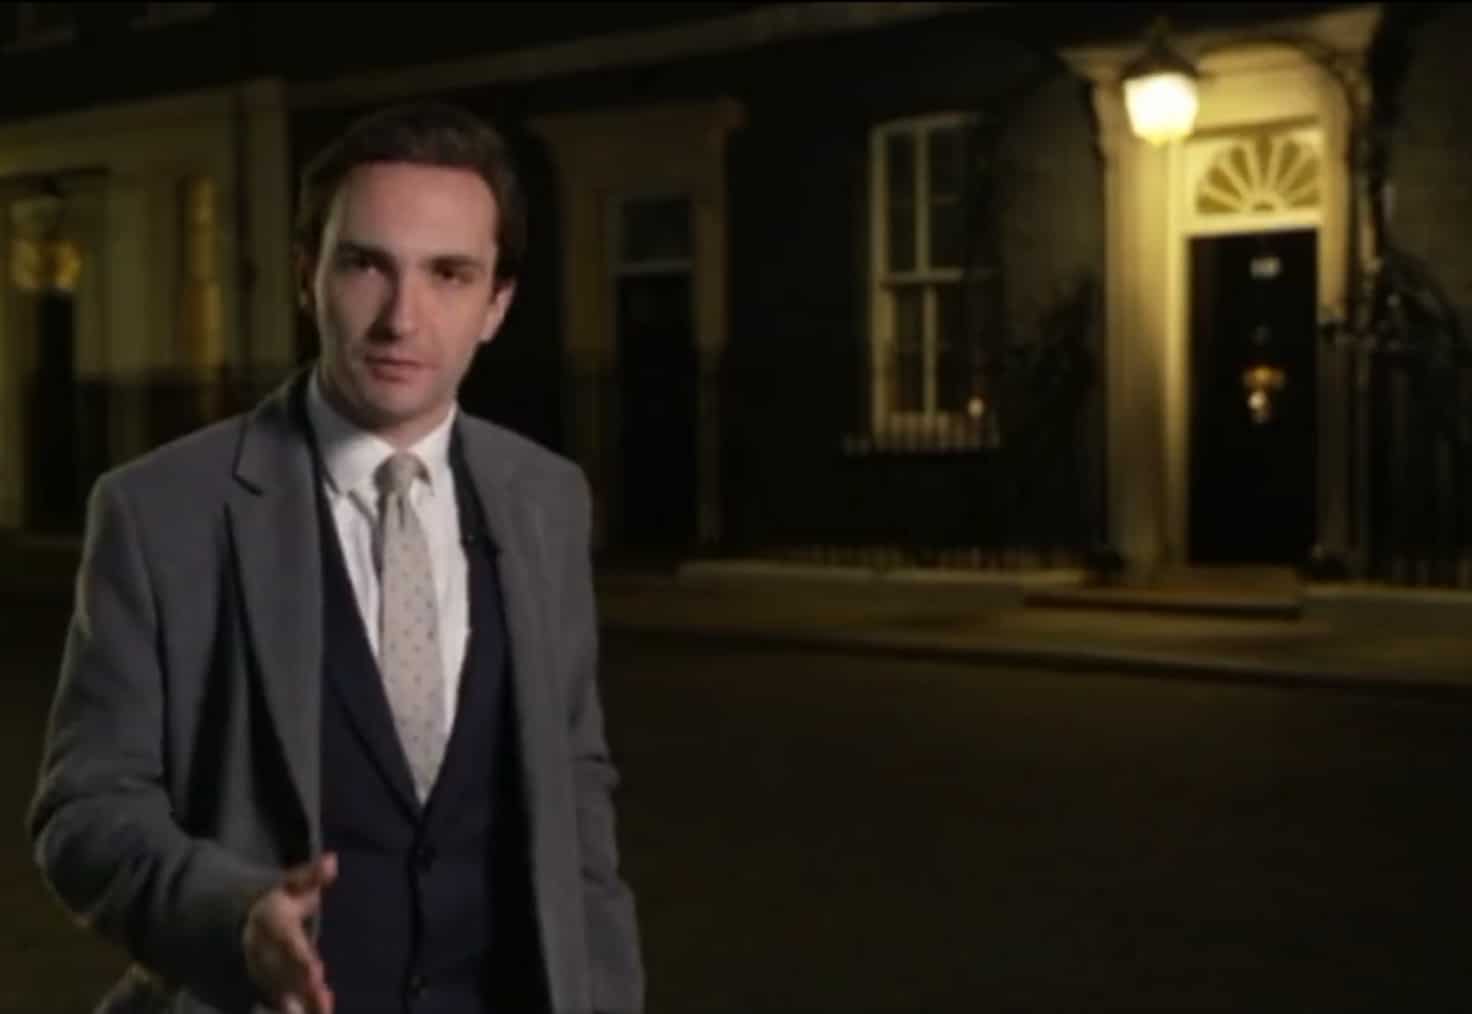 ‘One for the history books’: Lewis Goodall sums up Downing Street chaos